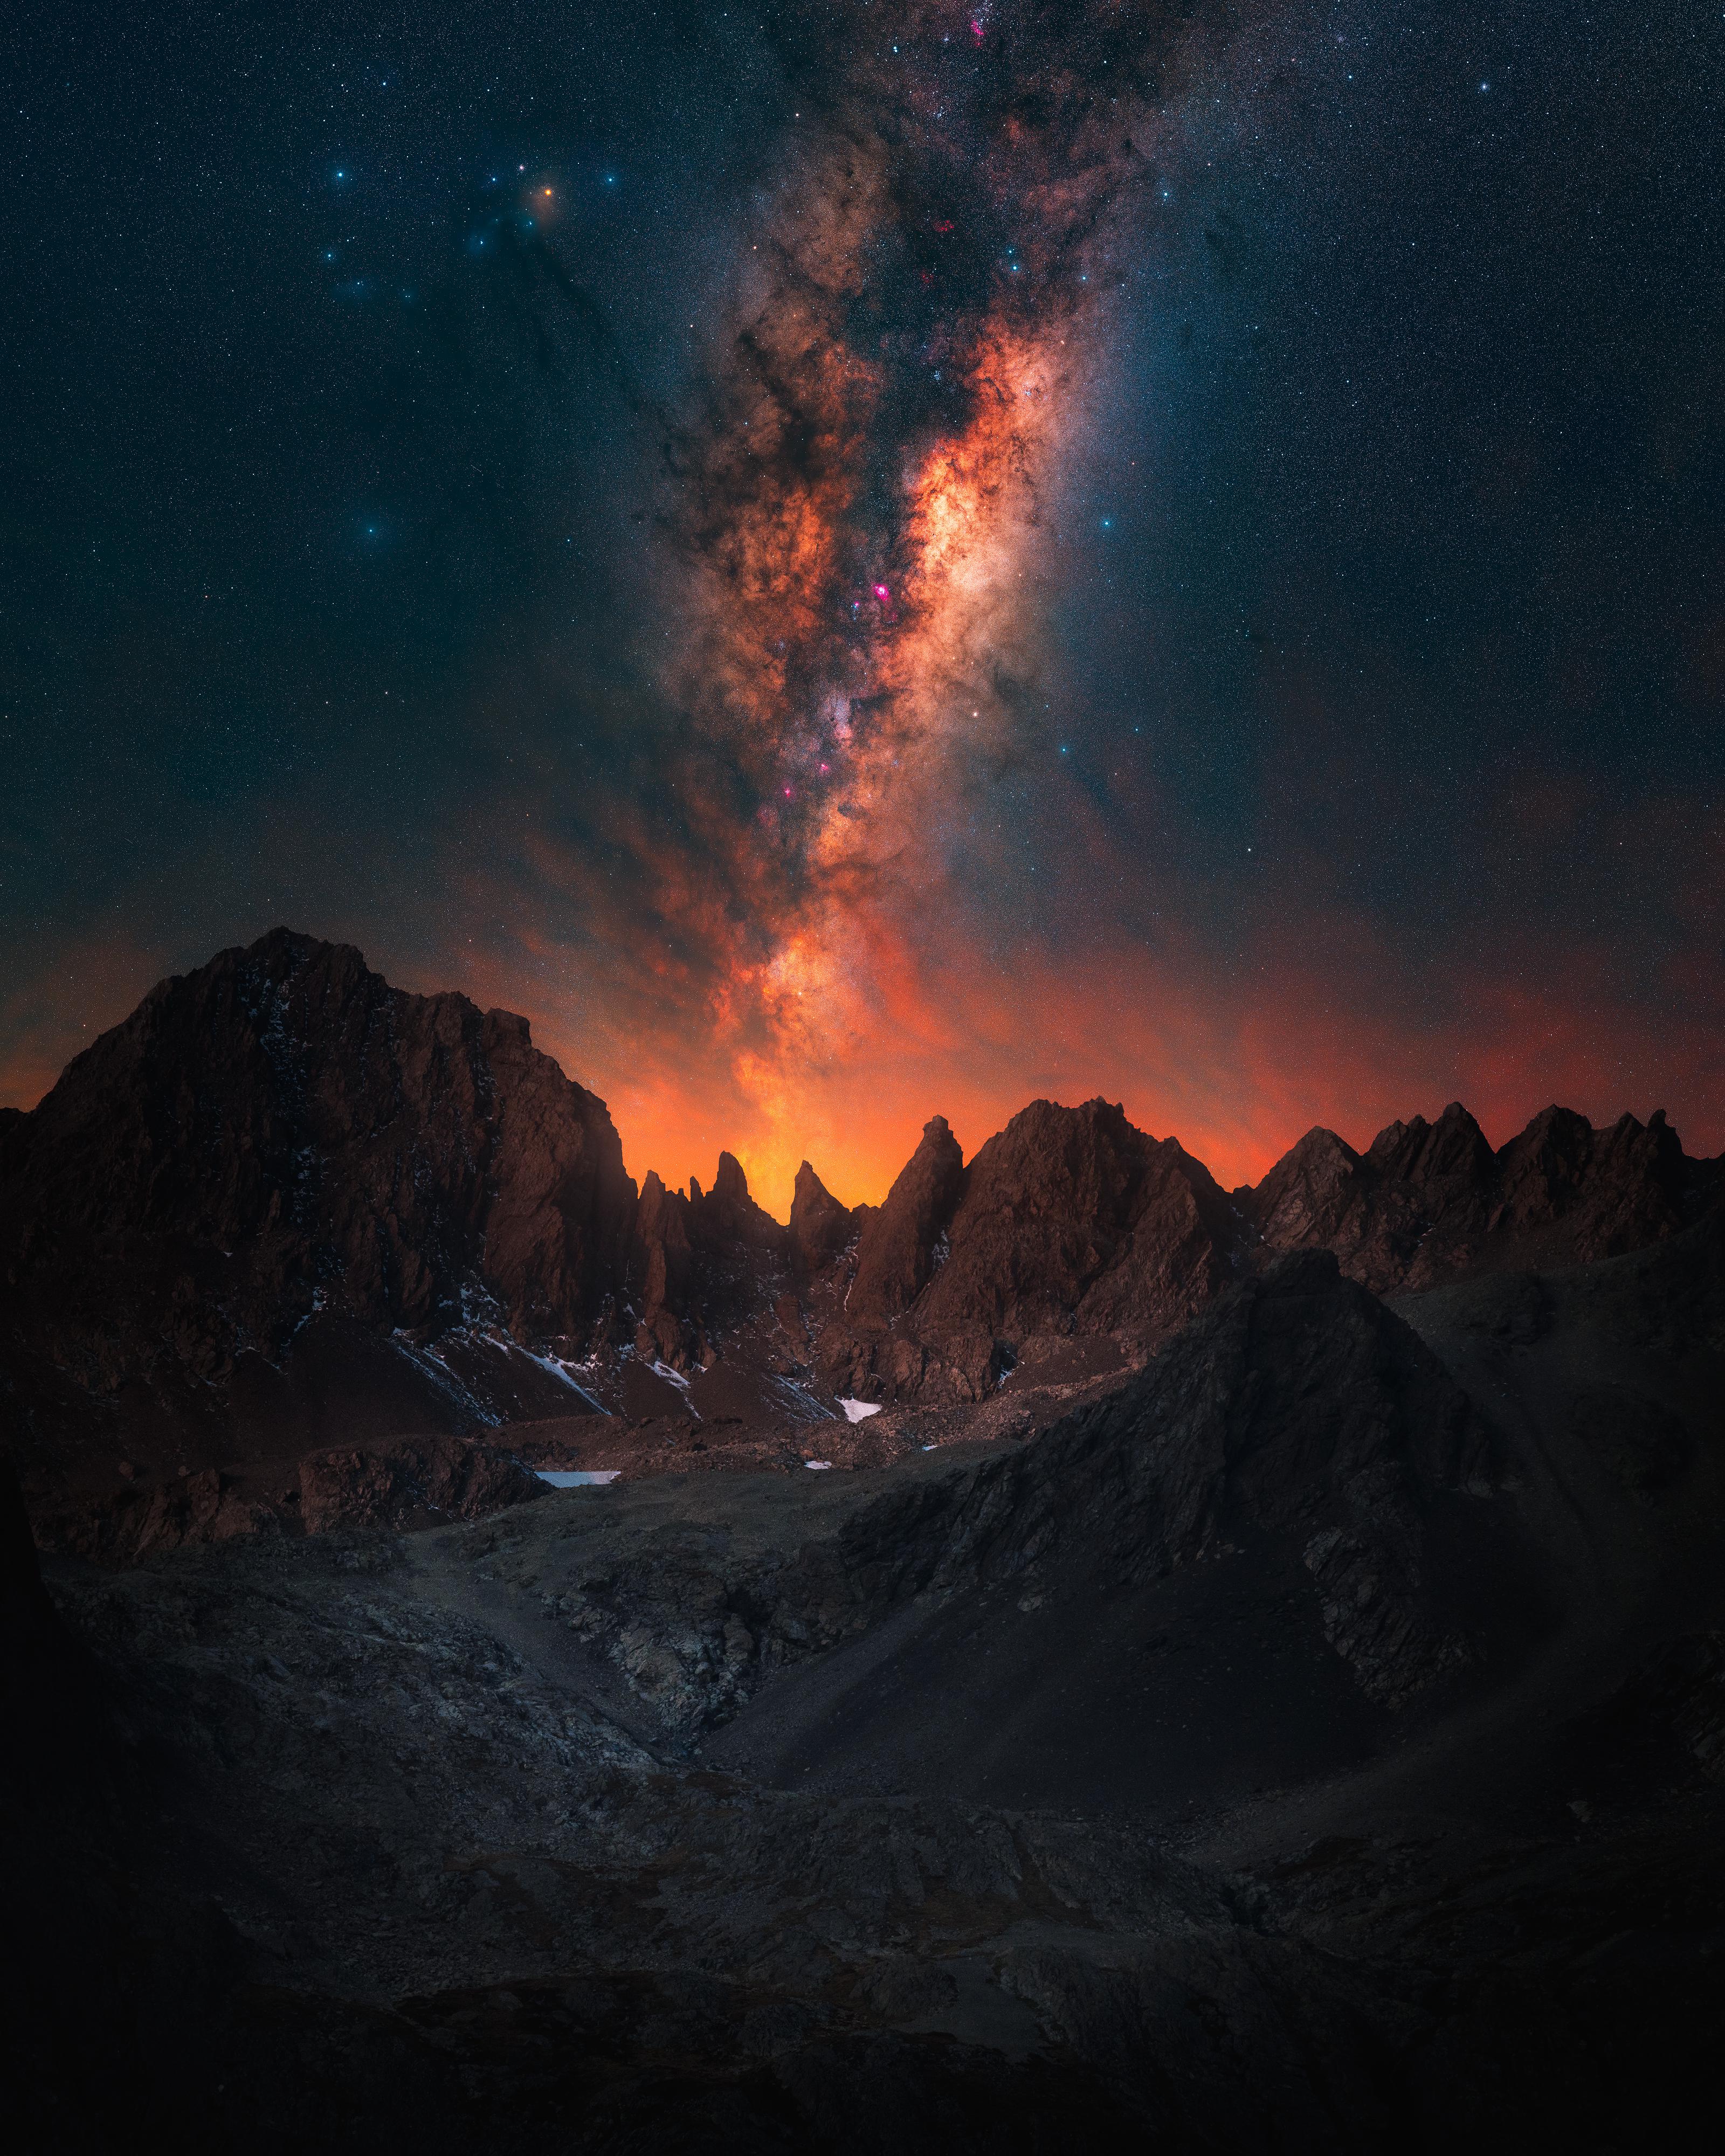 Photography Night Nature Landscape Stars Milky Way Portrait Display Sunset Mountains Snow Paul Wilso 3200x4000